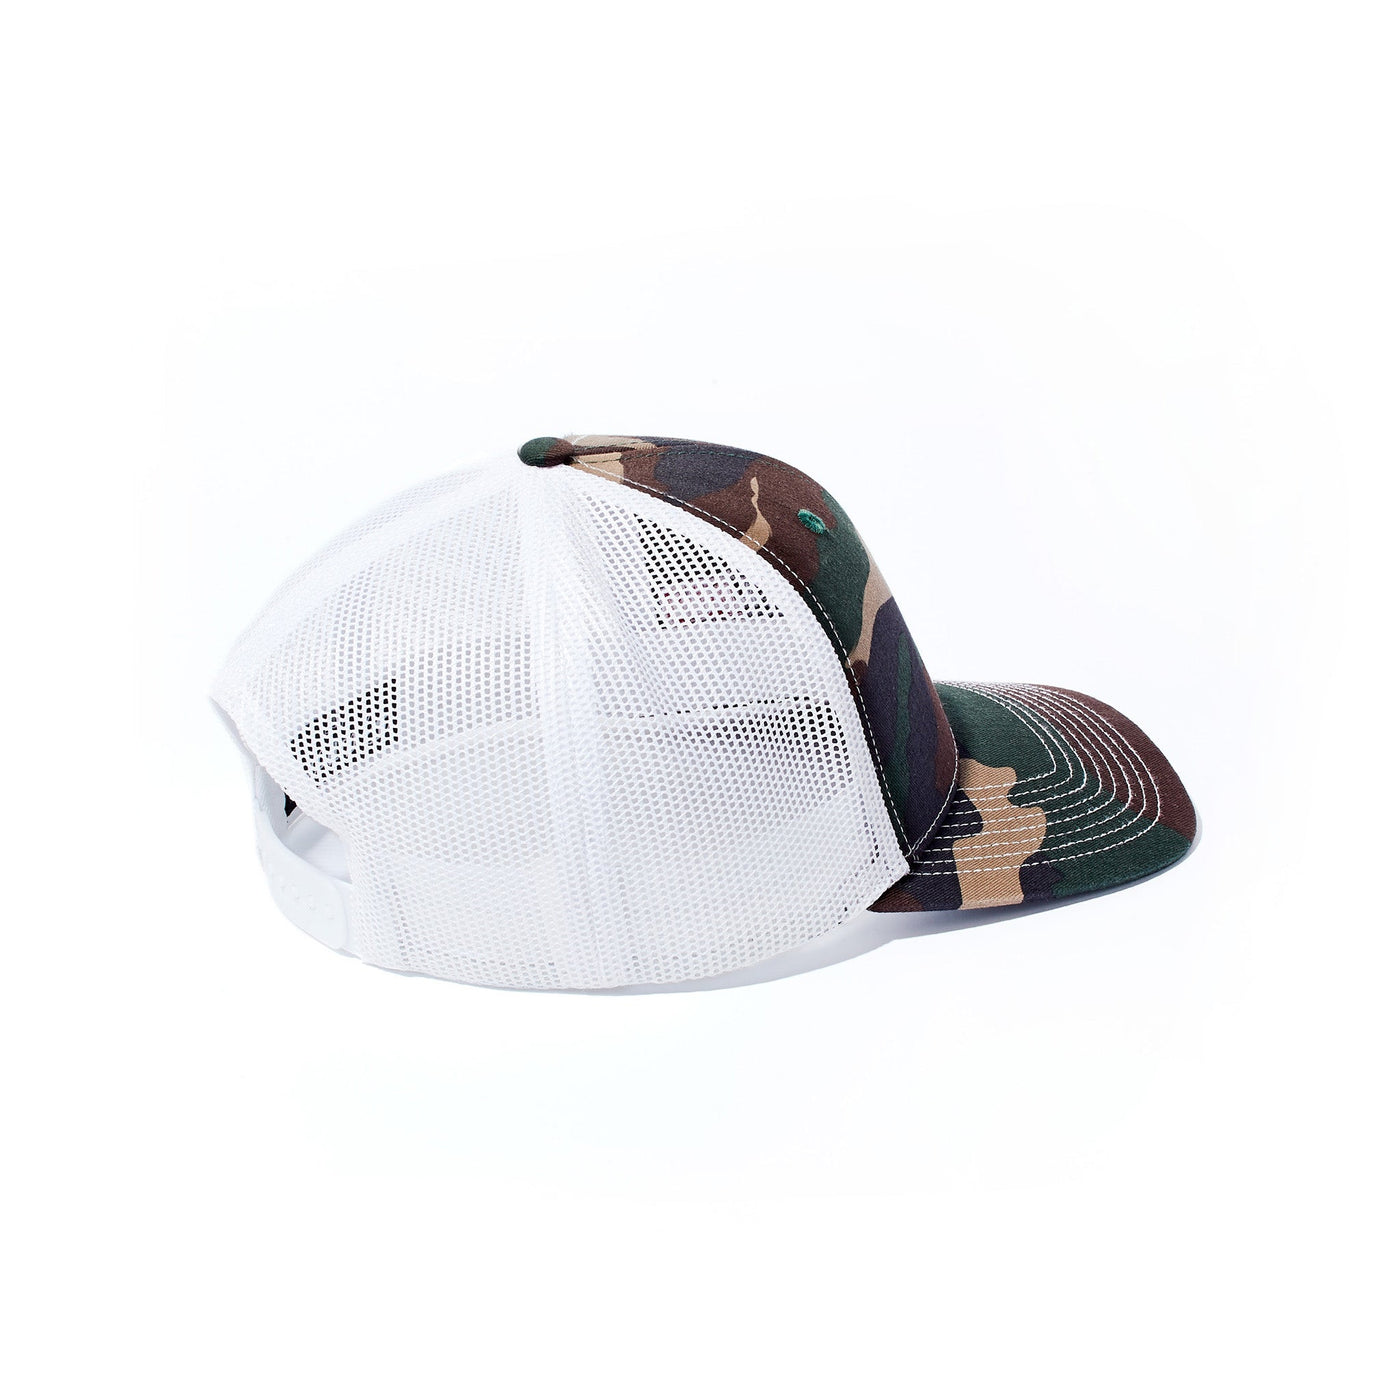 Camo Truck Style Cap - Carry The Load Shop